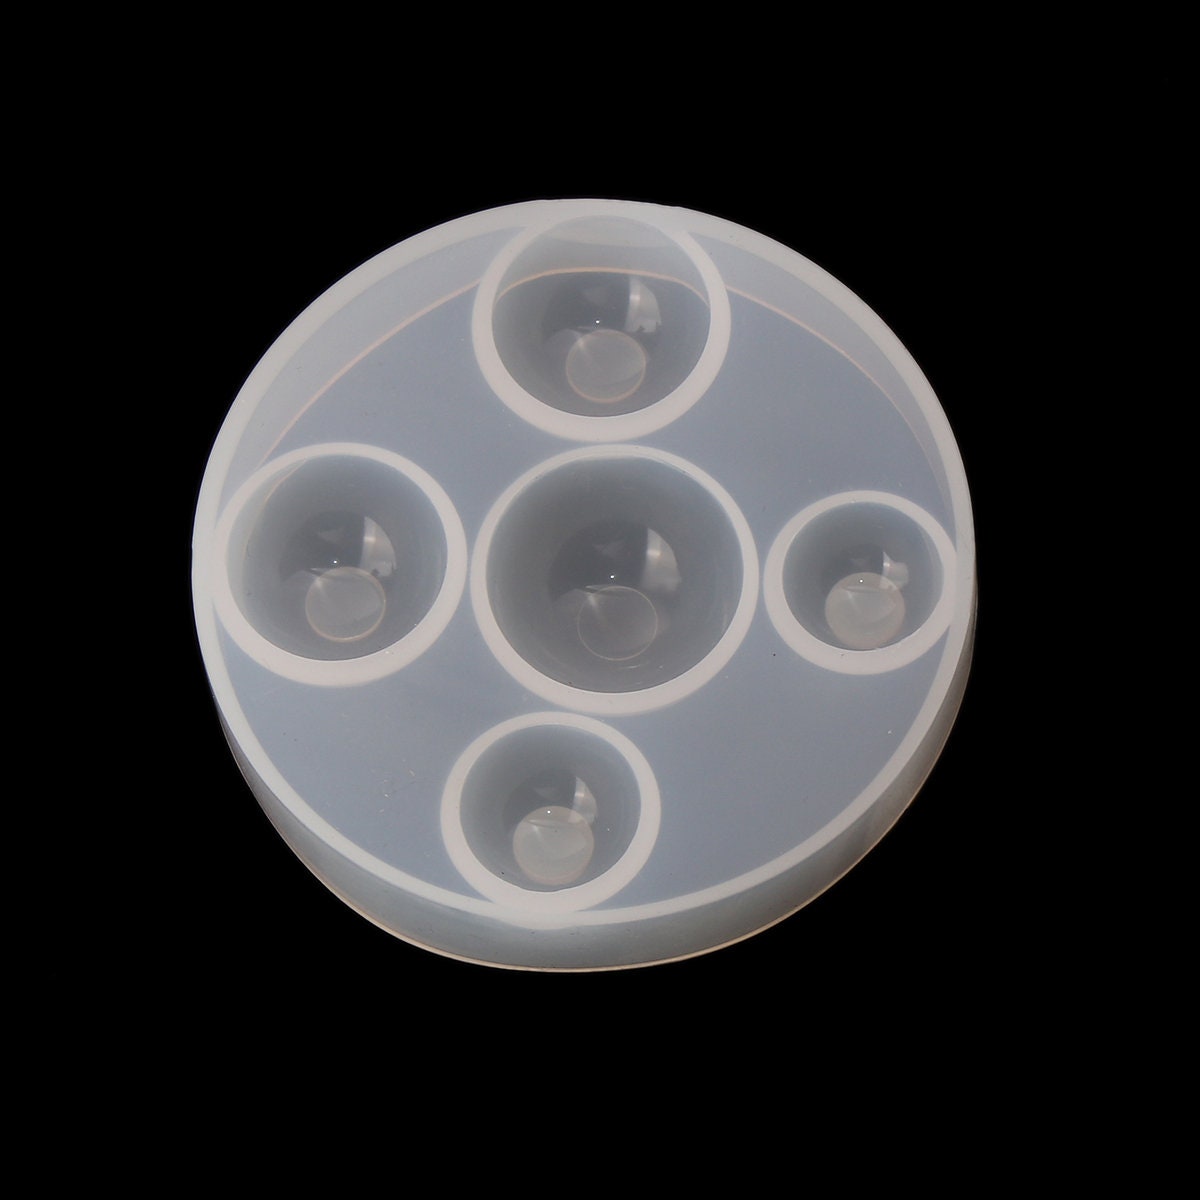 Large Hollow Dome Silicone Mold, Hollow Dome Silicone Mold (2 Cavity), Hollow Ball Mold, Flexible Half Sphere Mold, UV Resin Mold, Shaker Charm  Making